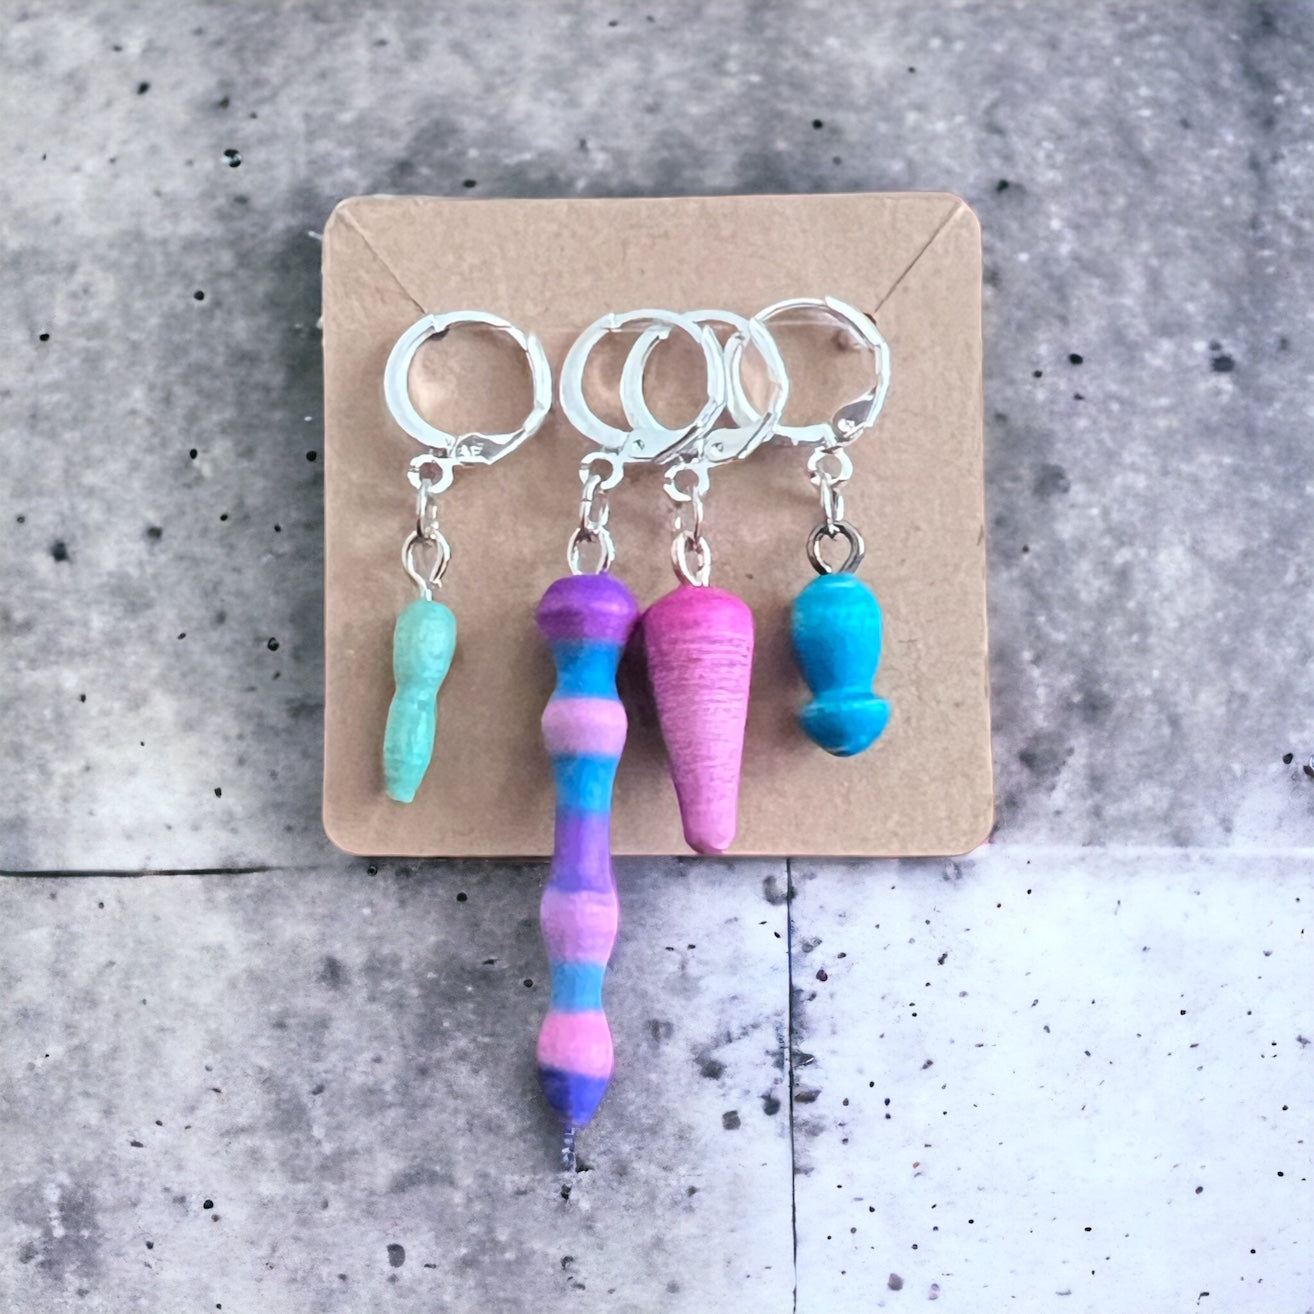 Set of 4 Wooden Hand-turned progress keepers/stitch markers